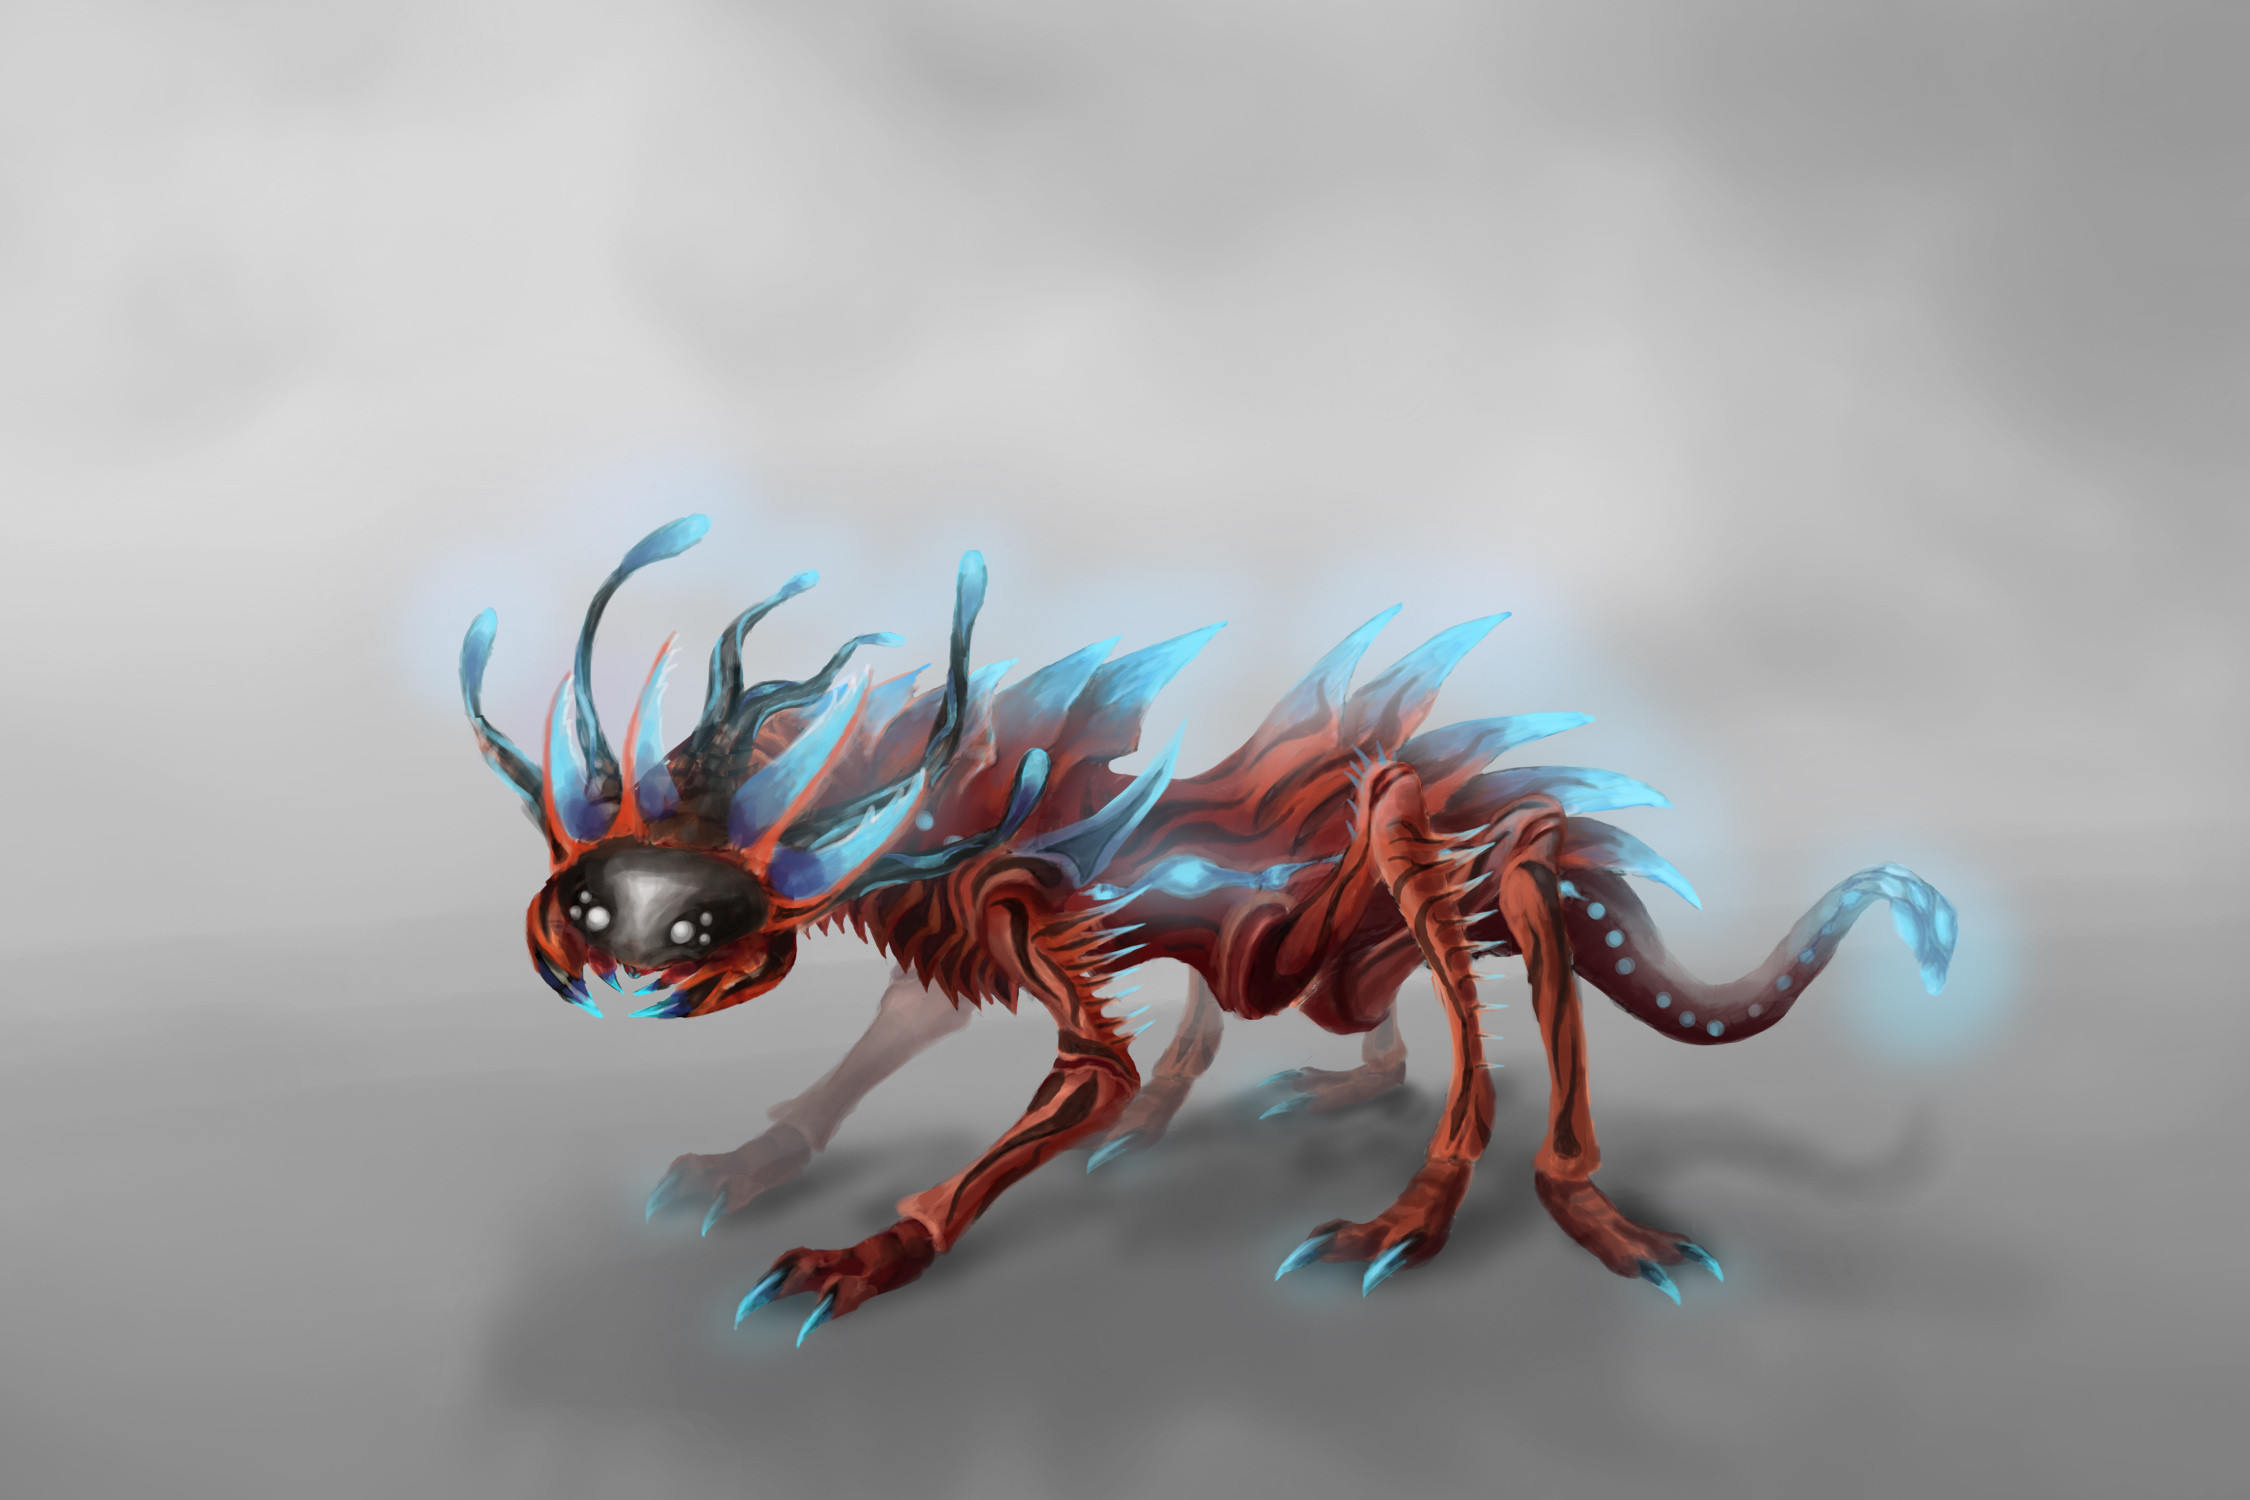 Mantor - Second Stage
It is quite agile and much faster than the first or last stage of this creature, but is more vulnerable than the adult one, lacking the big chitin armor and the claws to attack.